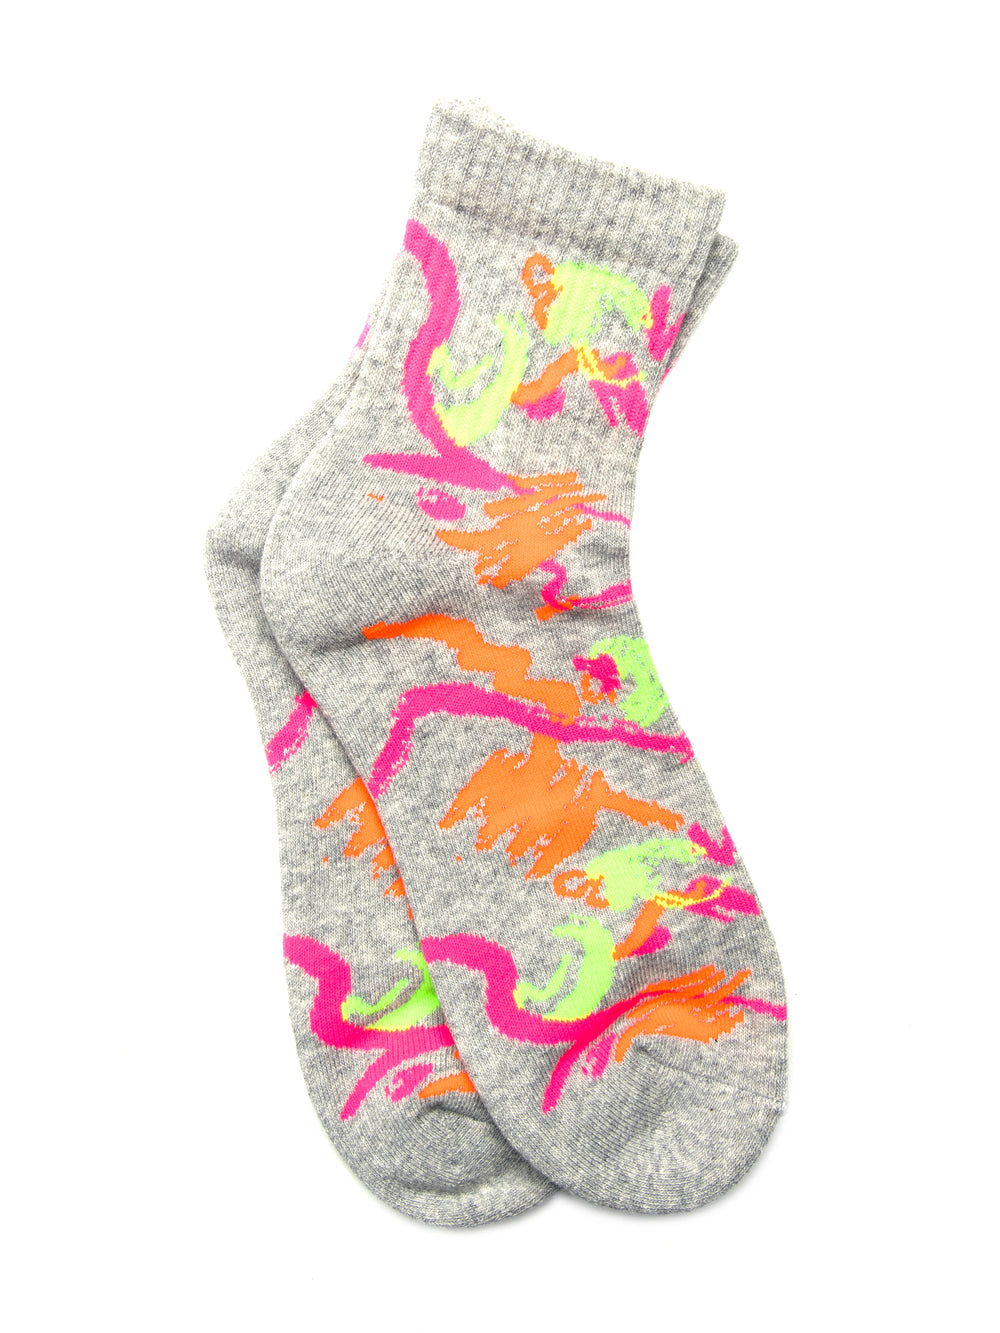 SCOUT & TRAIL SCRIBBLES SOCKS - CLEARANCE